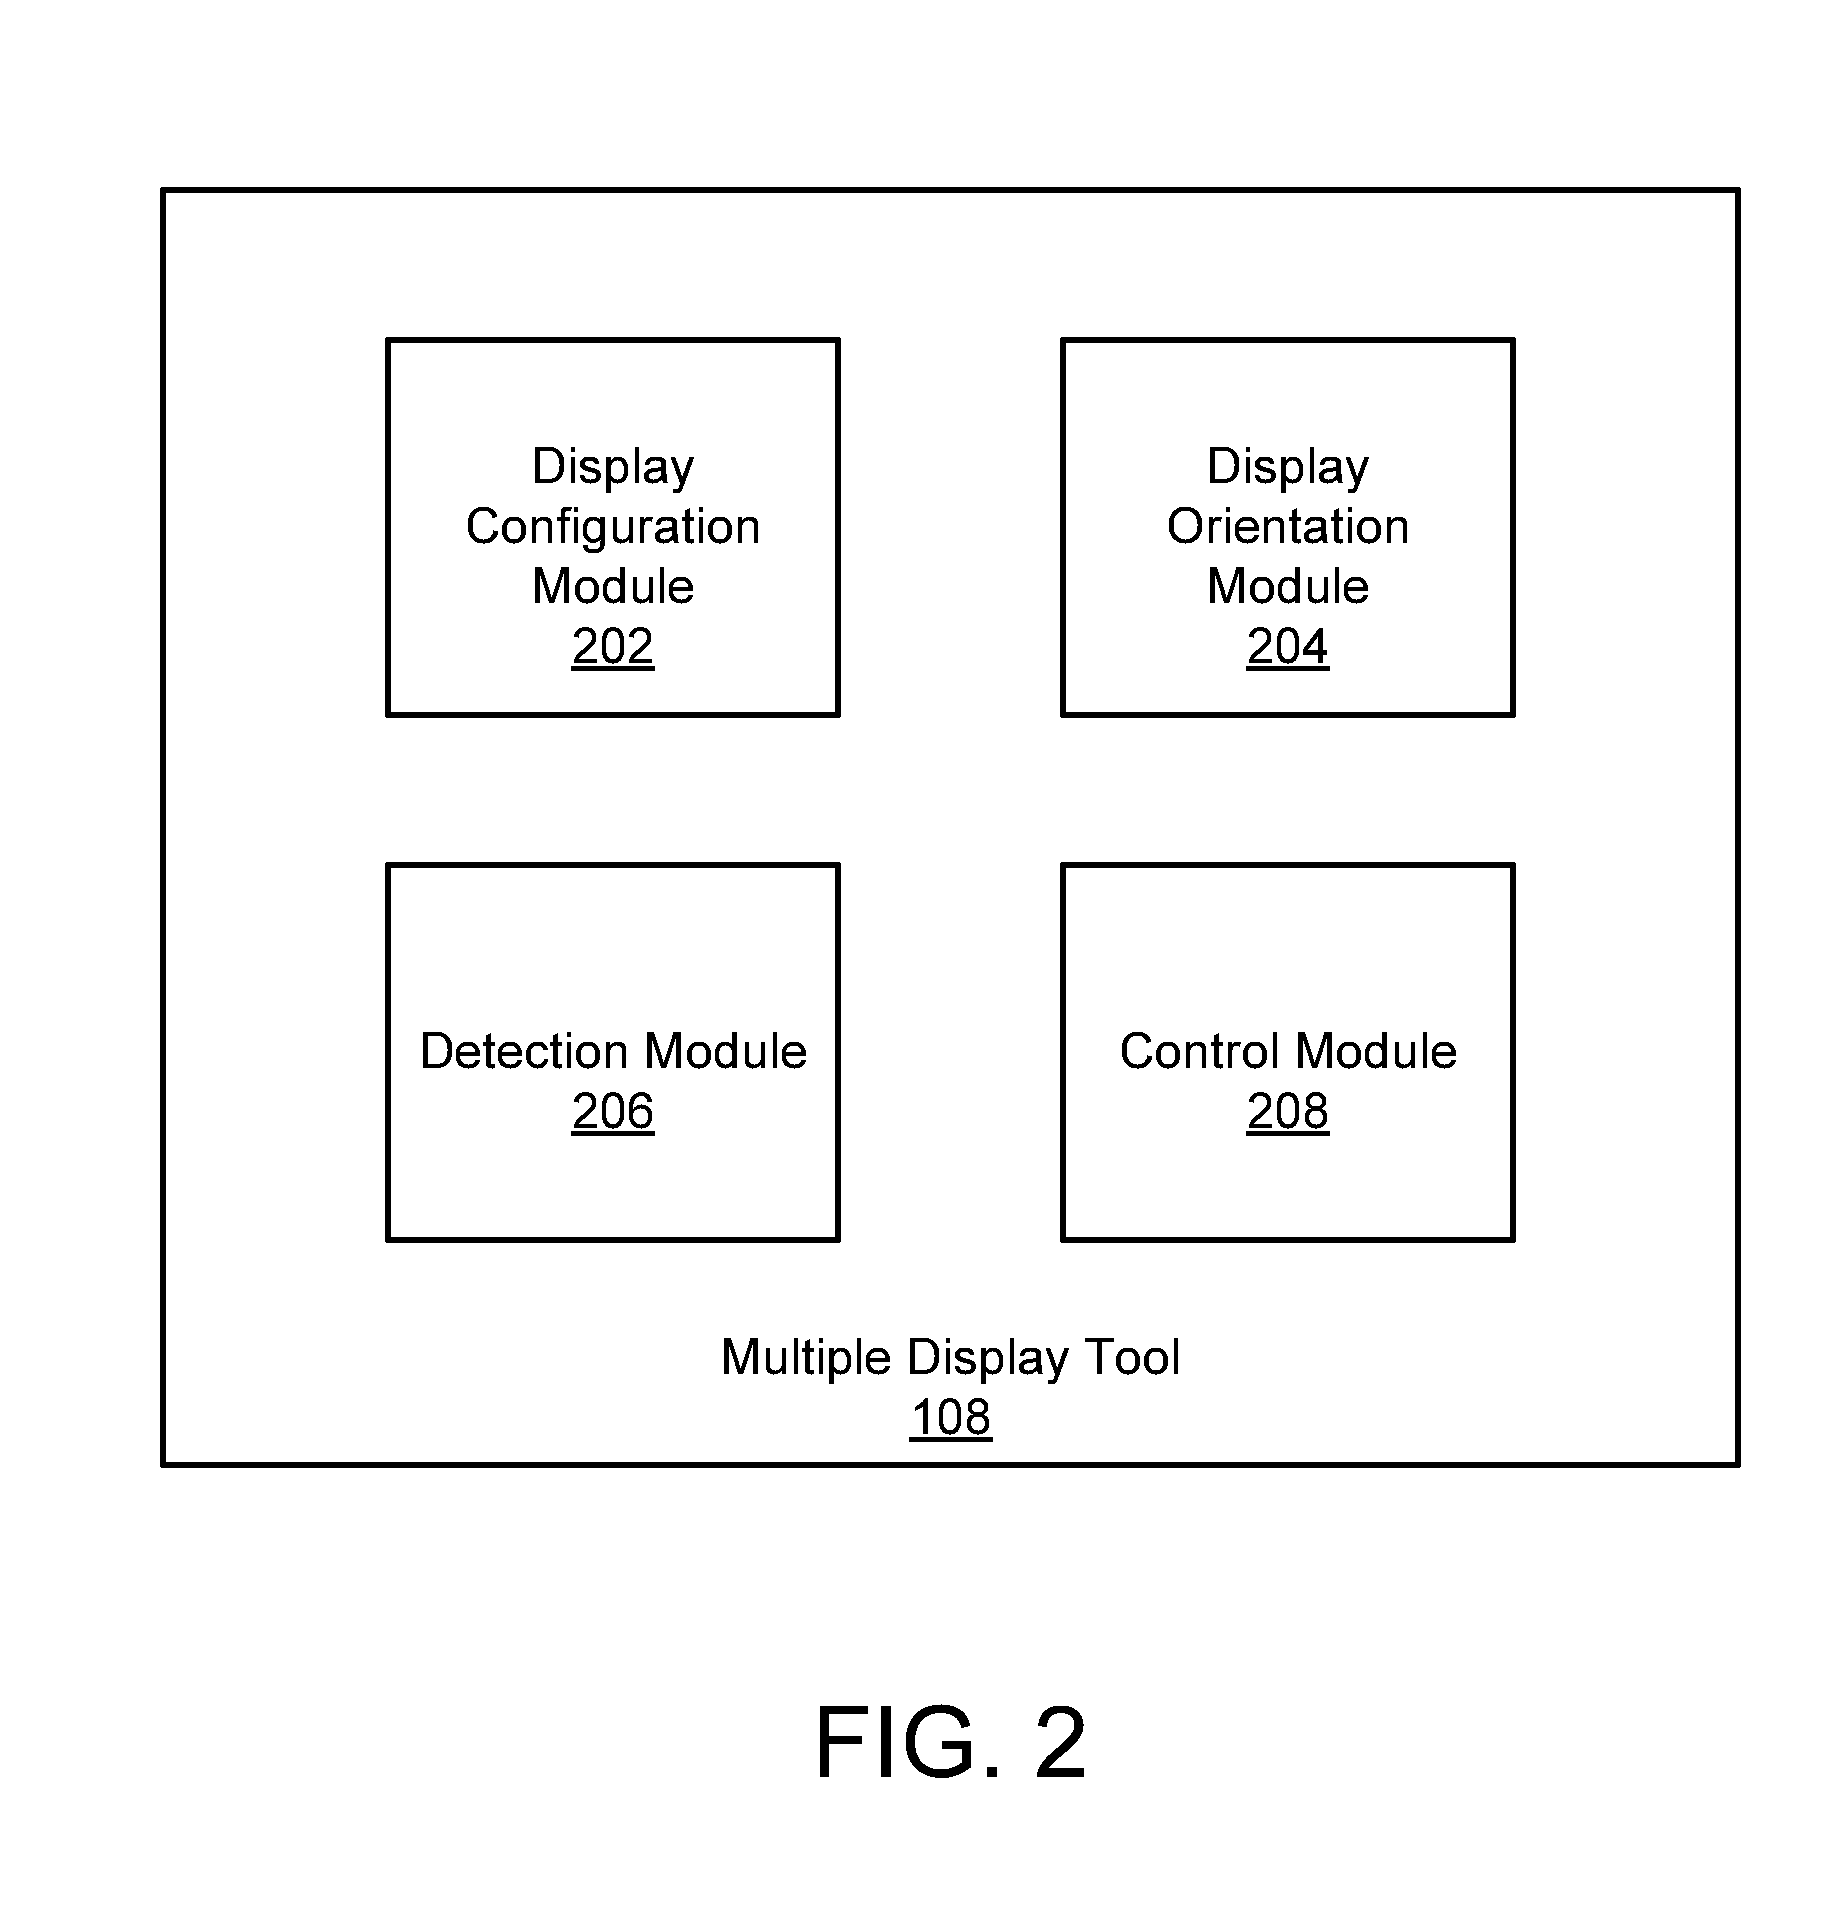 Combining multiple slate displays into a larger display matrix